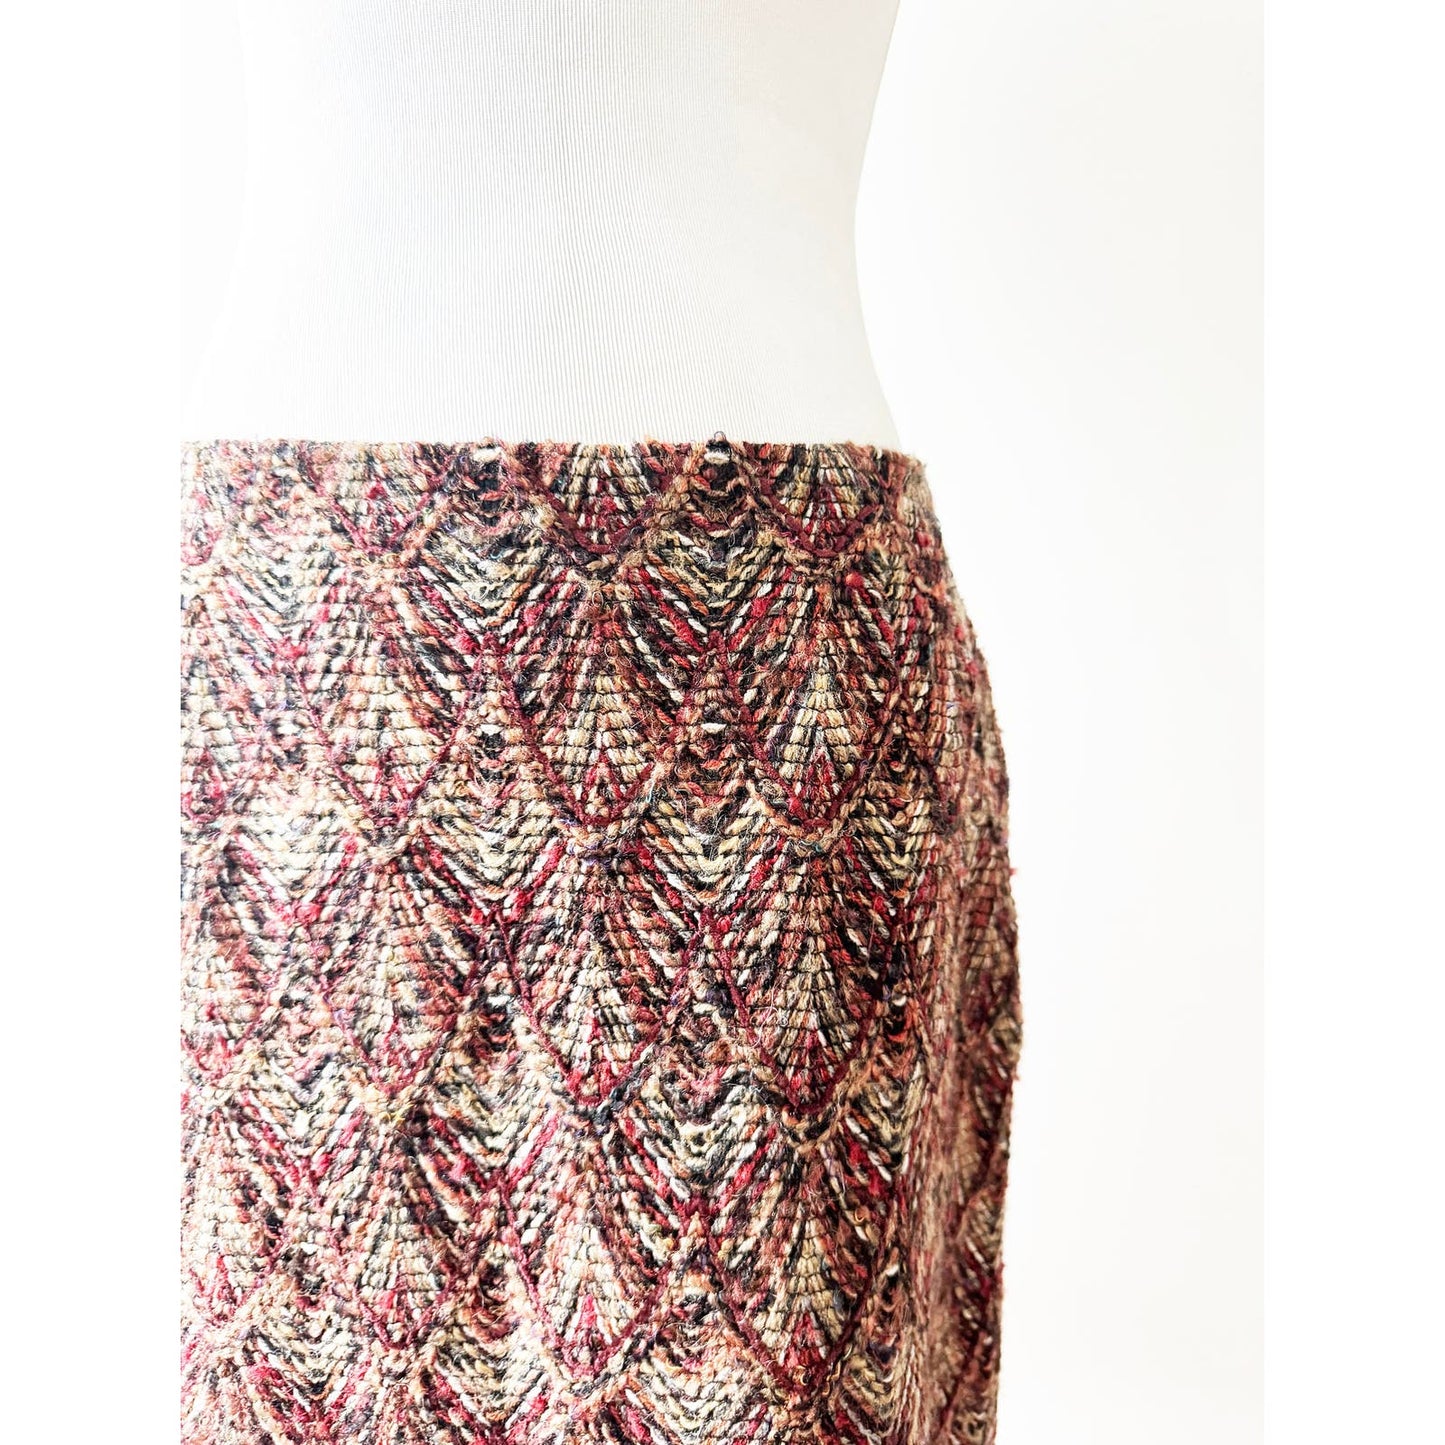 Y2k ANNA SUI Colorful Knit Skirt | Size US 8